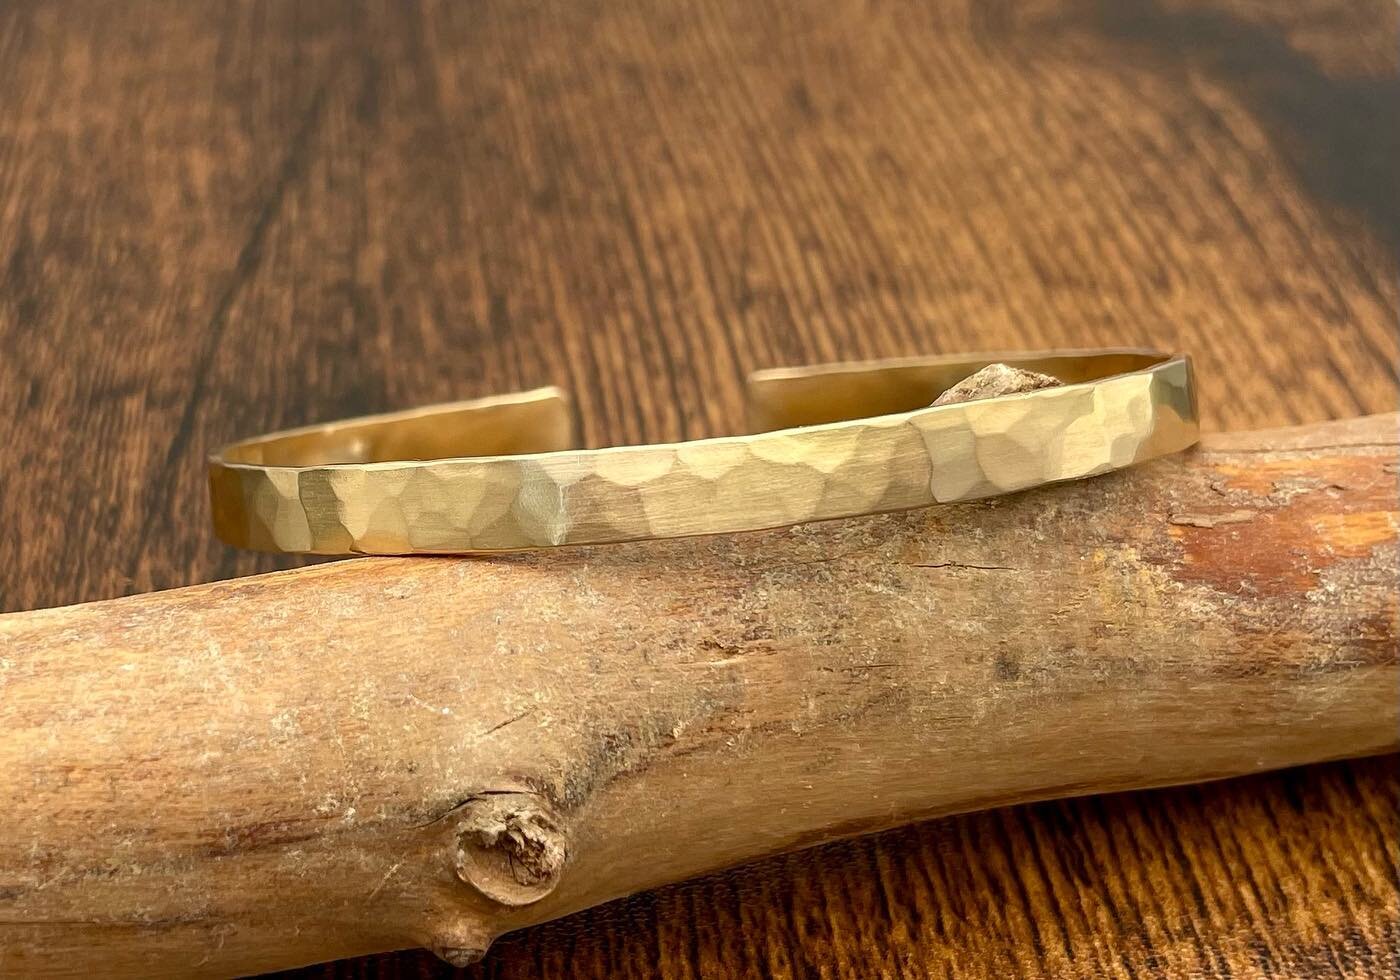 Had to photograph this 18k gold hammered cuff before sending it out today. It looked so stunning in the autumn light. 

#18kgoldcuff #18kgoldcuffbracelet #hammeredgoldcuff #18kgoldbracelet #mensgoldcuff #womensgoldcuffbracelets #handmadegoldjewelry #